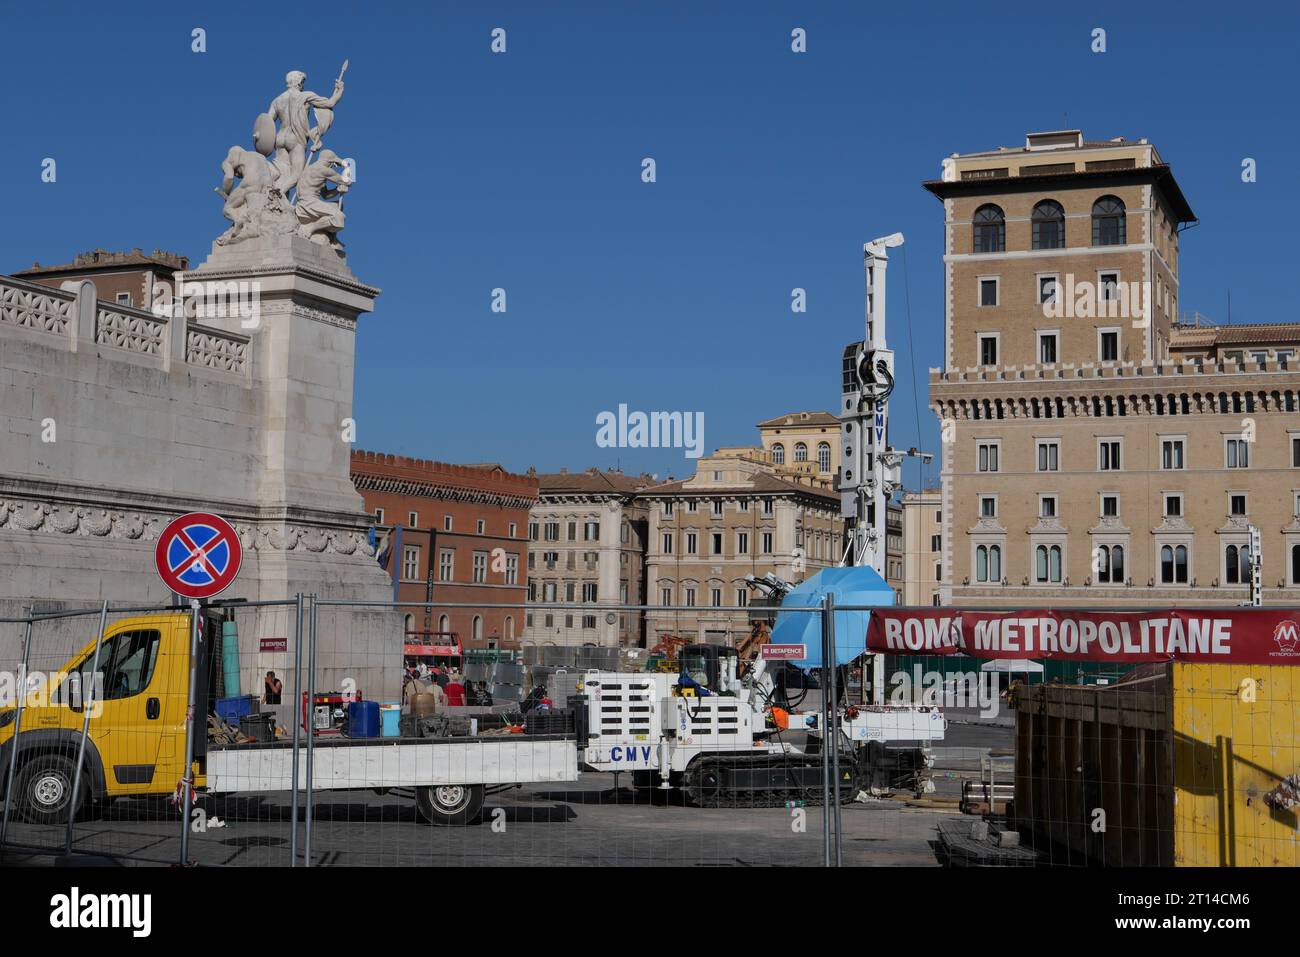 SIGN OF METRO LINE C.URBAN WORKS FOR THE CONSTRUCTION OF THE PIAZZA VENEZIA STATION OF THE UNDERGROUND LINE C Stock Photo